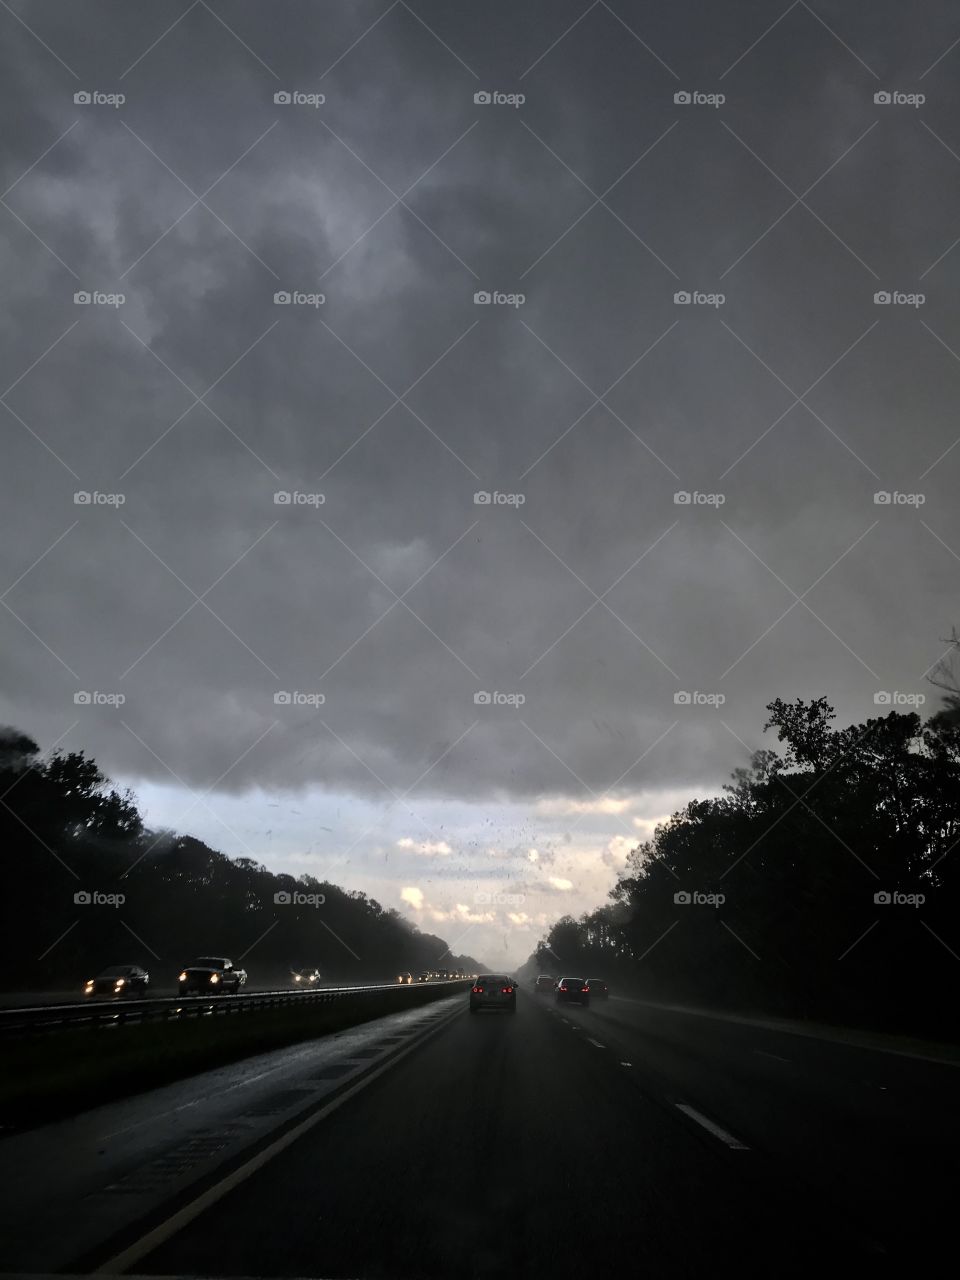 Traveling out of a storm and capturing the dramatic front line of thunder storm clouds and the blue sky ahead 